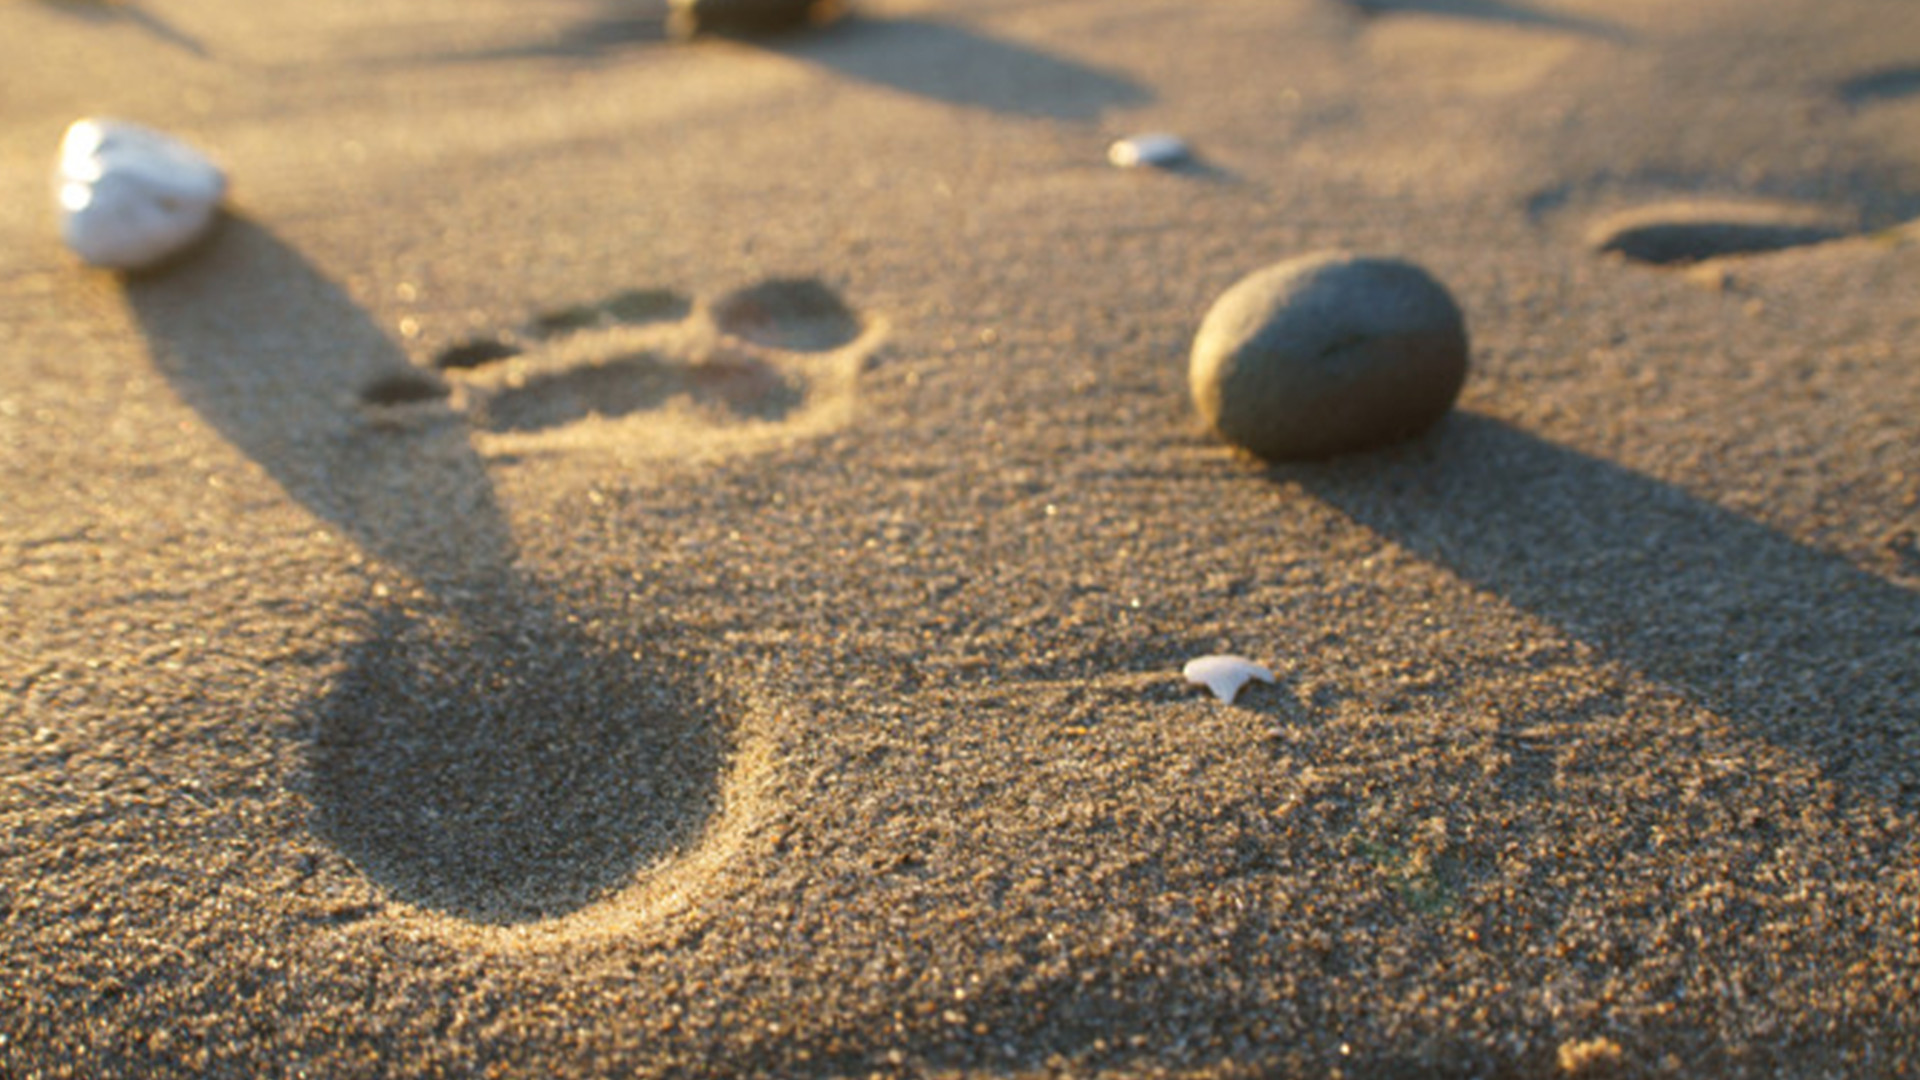 1920x1080 Footprints In The Sand Photograph by Andreas Thust ...